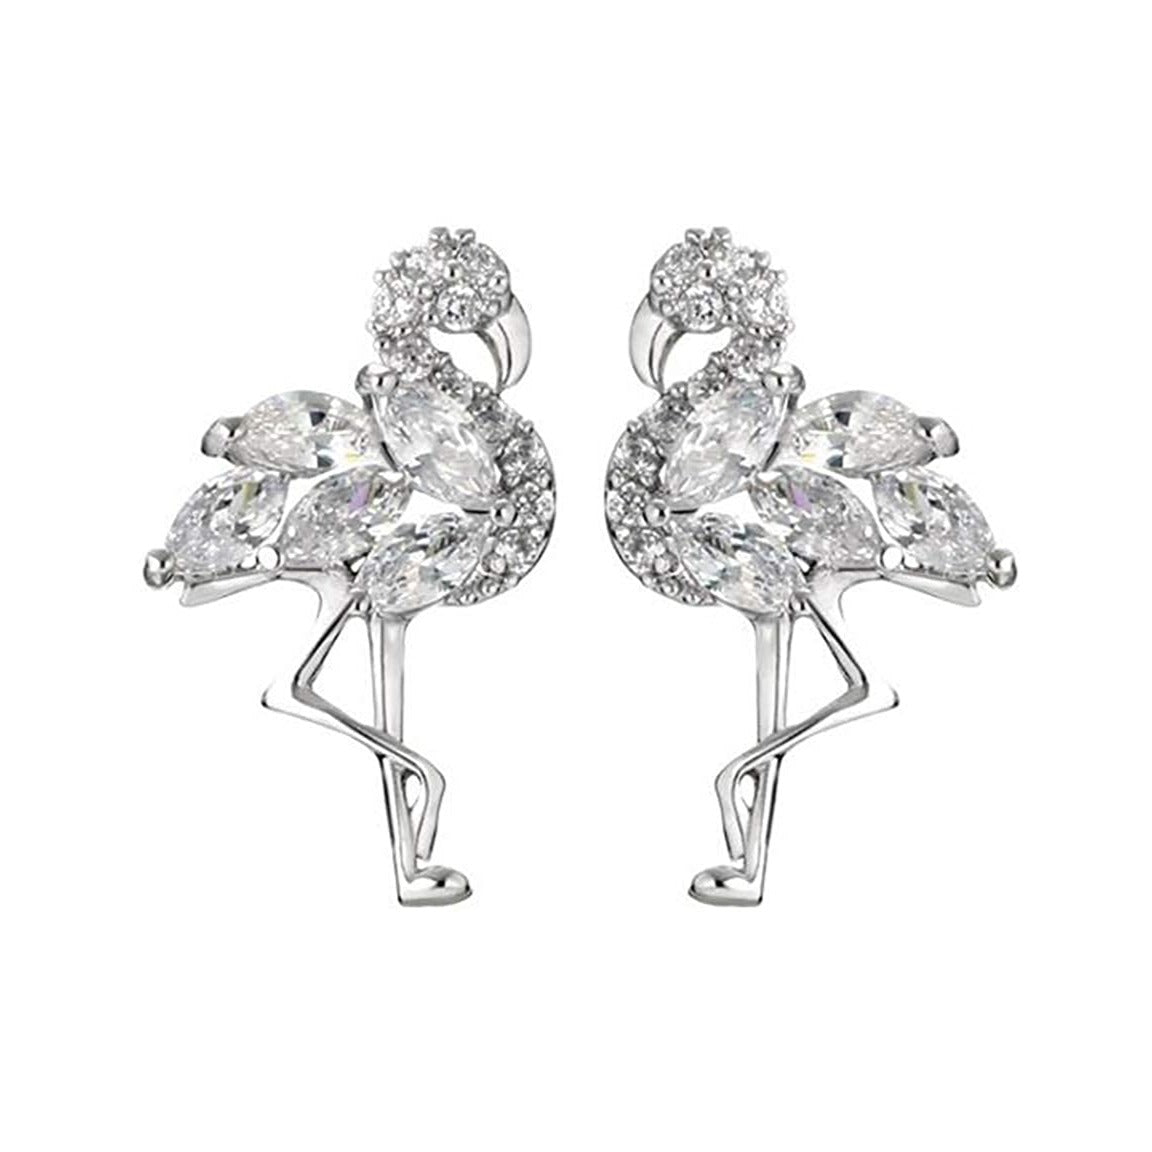 luxury Flamingo Bird Shaped 925 Silver AAAA Quality Handcrafted Cubic Zirconia & Chrystal Stud Hypoallergenic Earrings for Women, Kids or any fashionably ready being who absolutely loves the best in Luxury Jewelry. These Beautiful and Cute Earrings make a great addition with any attire from Shorts and Flip Flops to an elegant dress and heels, these earrings are just right and perfect for anytime of day, night or event.